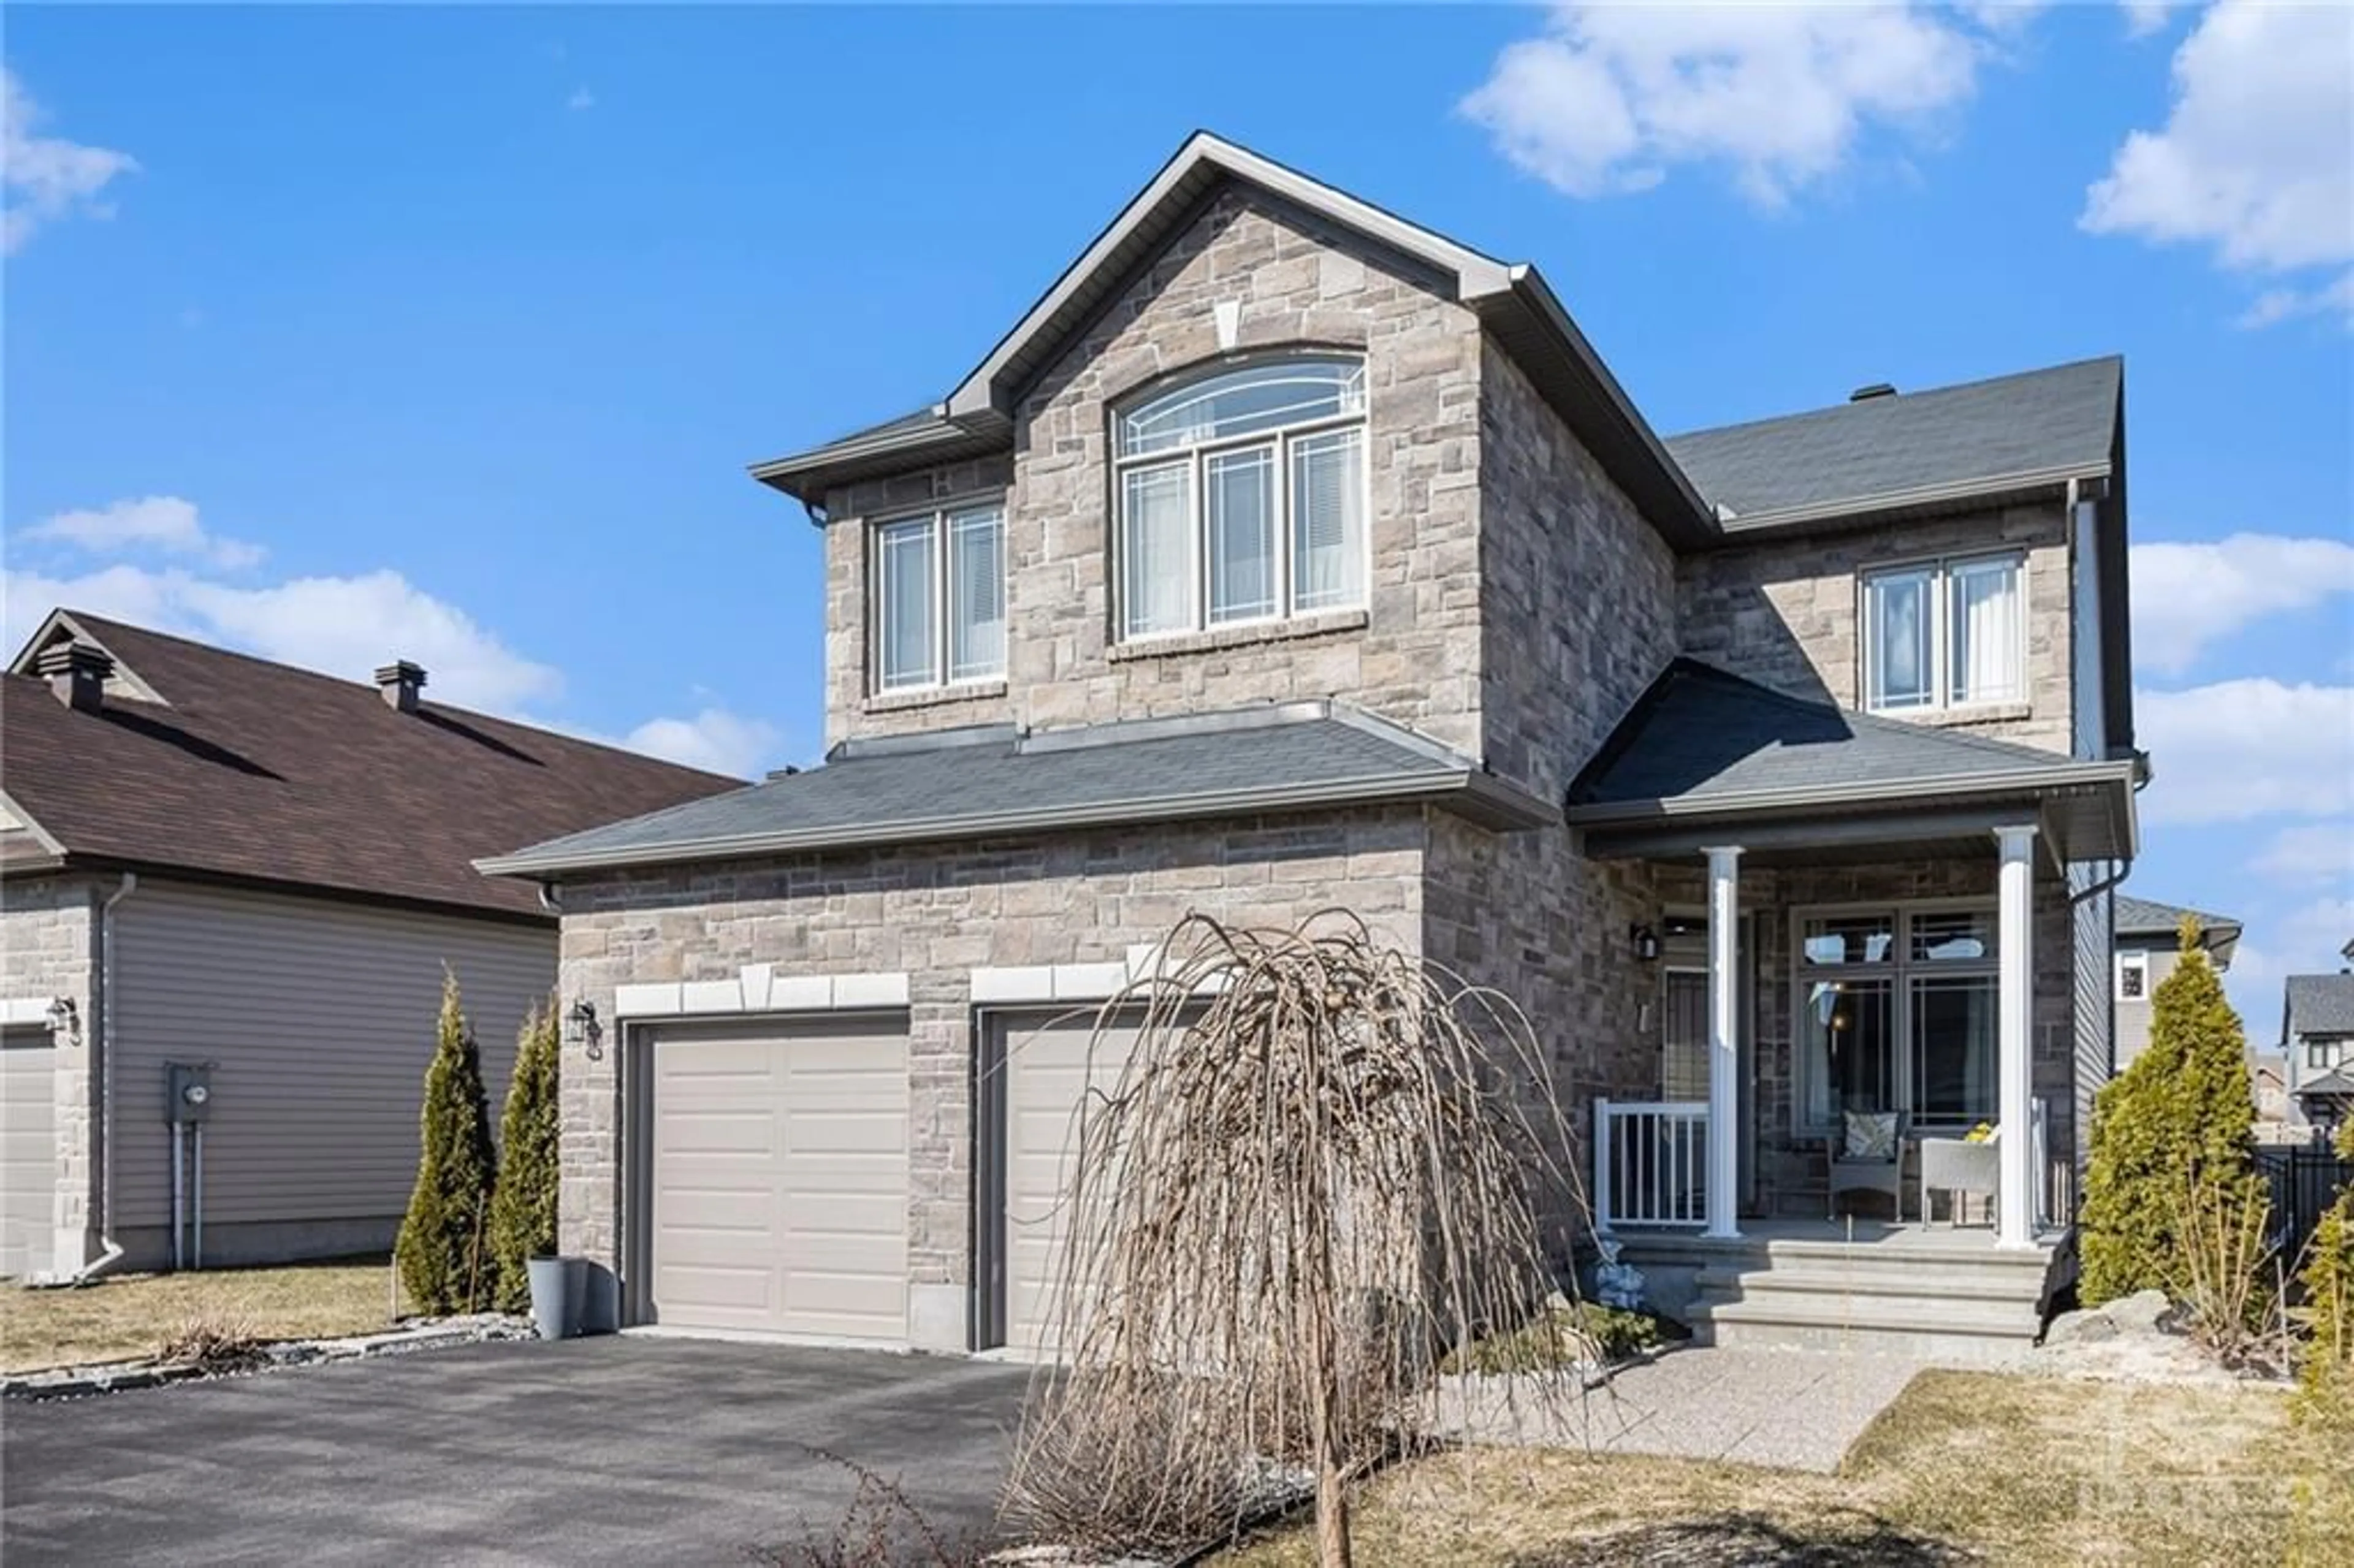 Home with stone exterior material for 820 PLATINUM St, Rockland Ontario K4K 1P6